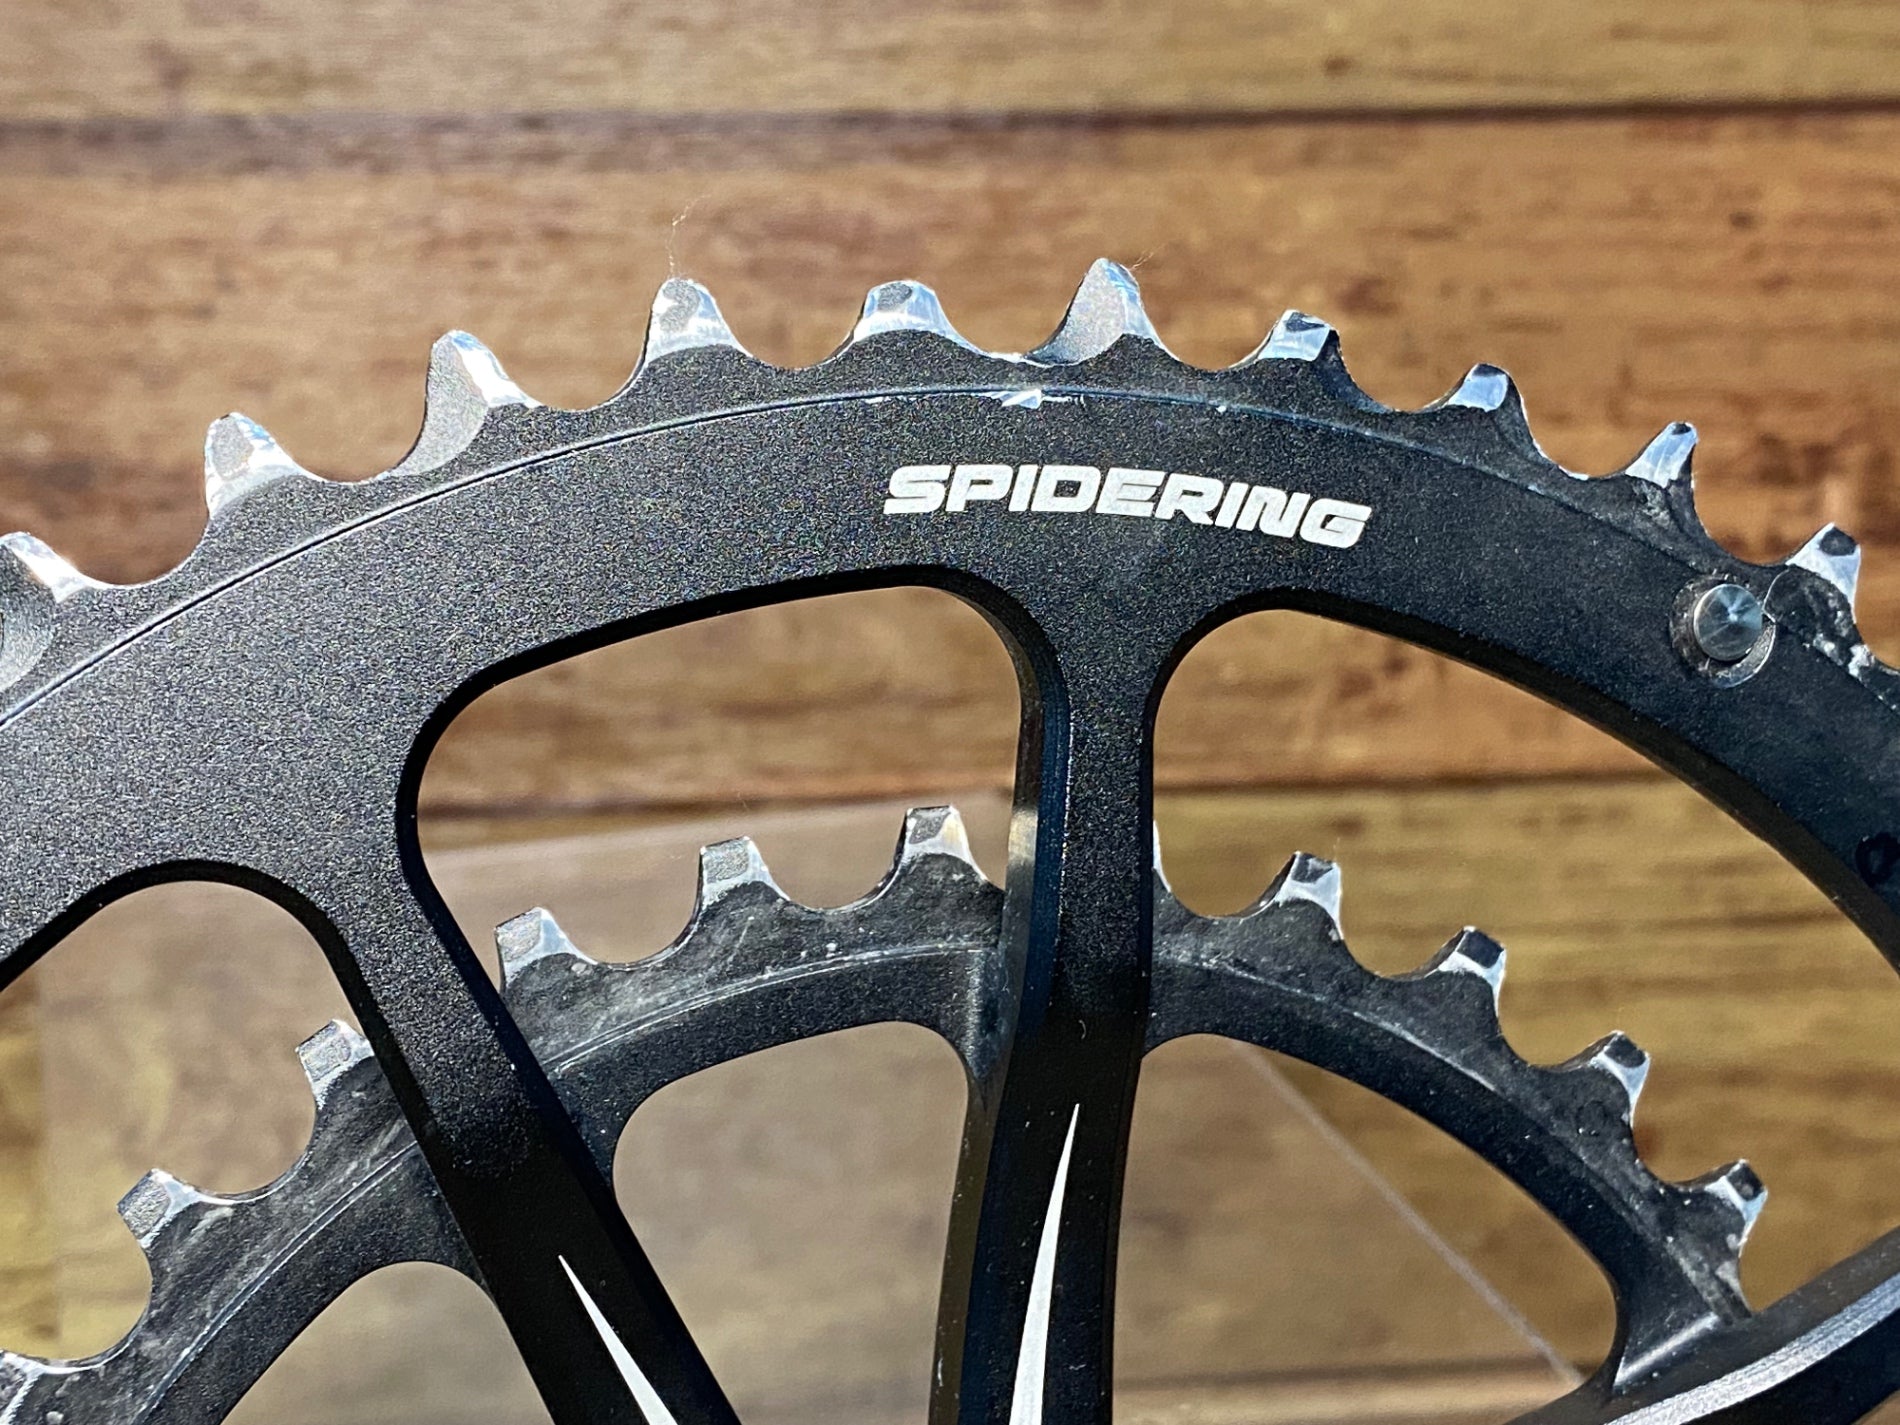 HS604 キャノンデール Cannondale OPI SPIDERING チェーンリング 50/34T